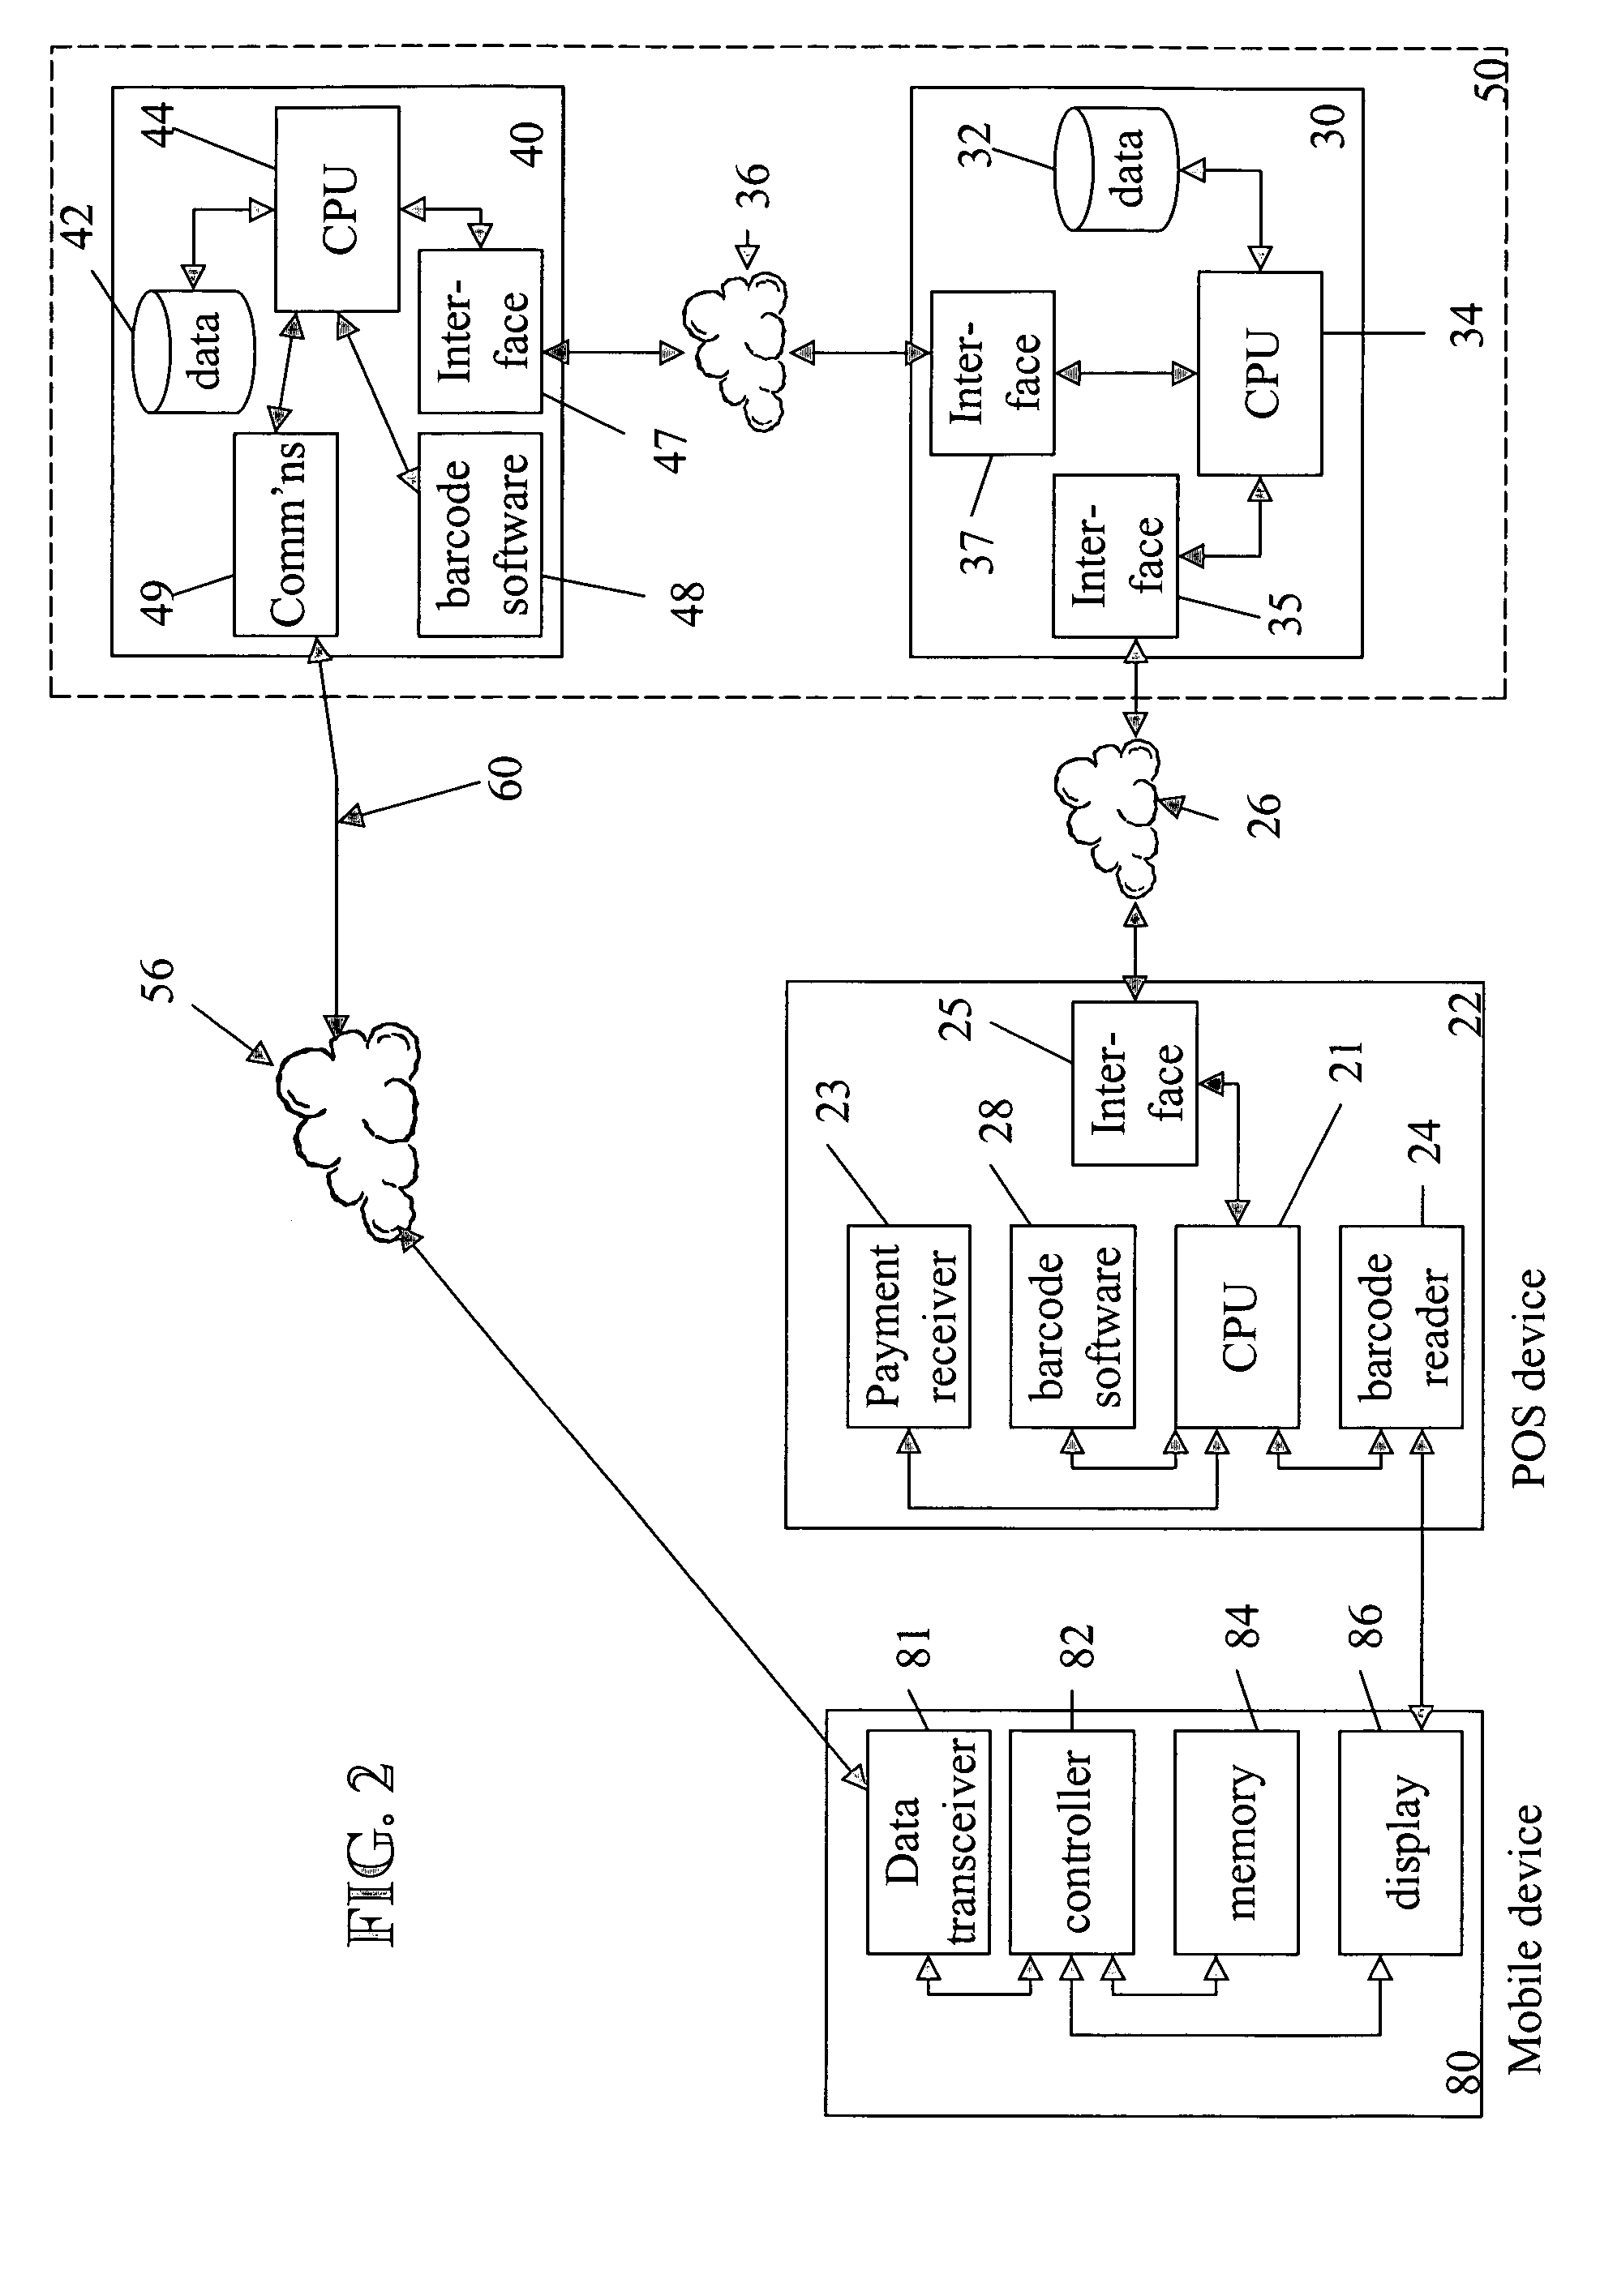 Electronic payment system